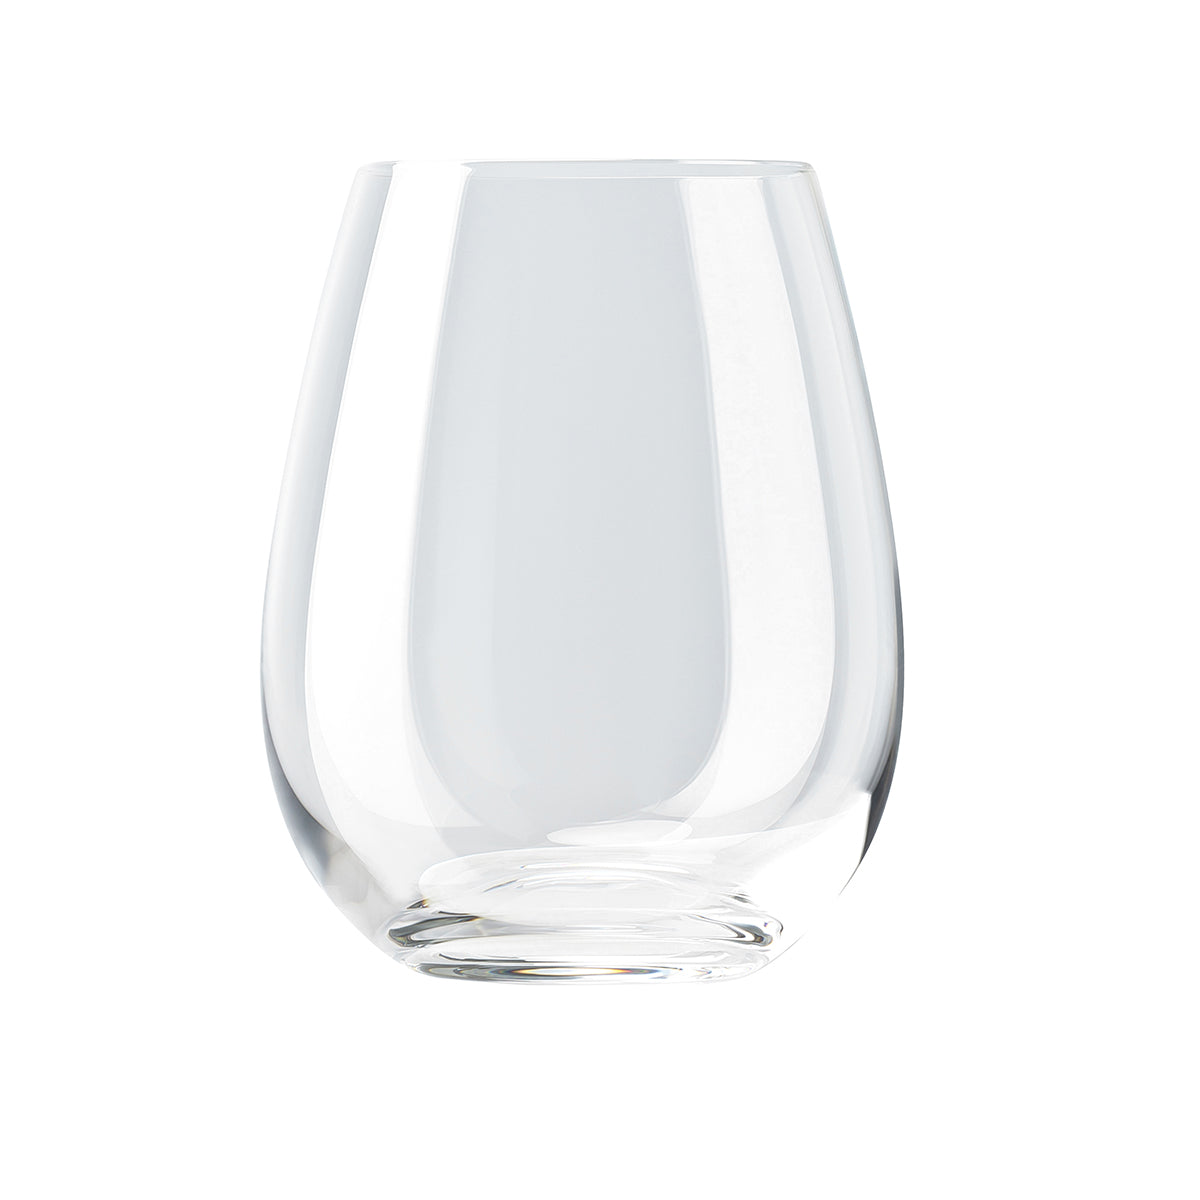 Rosenthal DiVino Water Glass - 15 oz - Boxed Set of 6